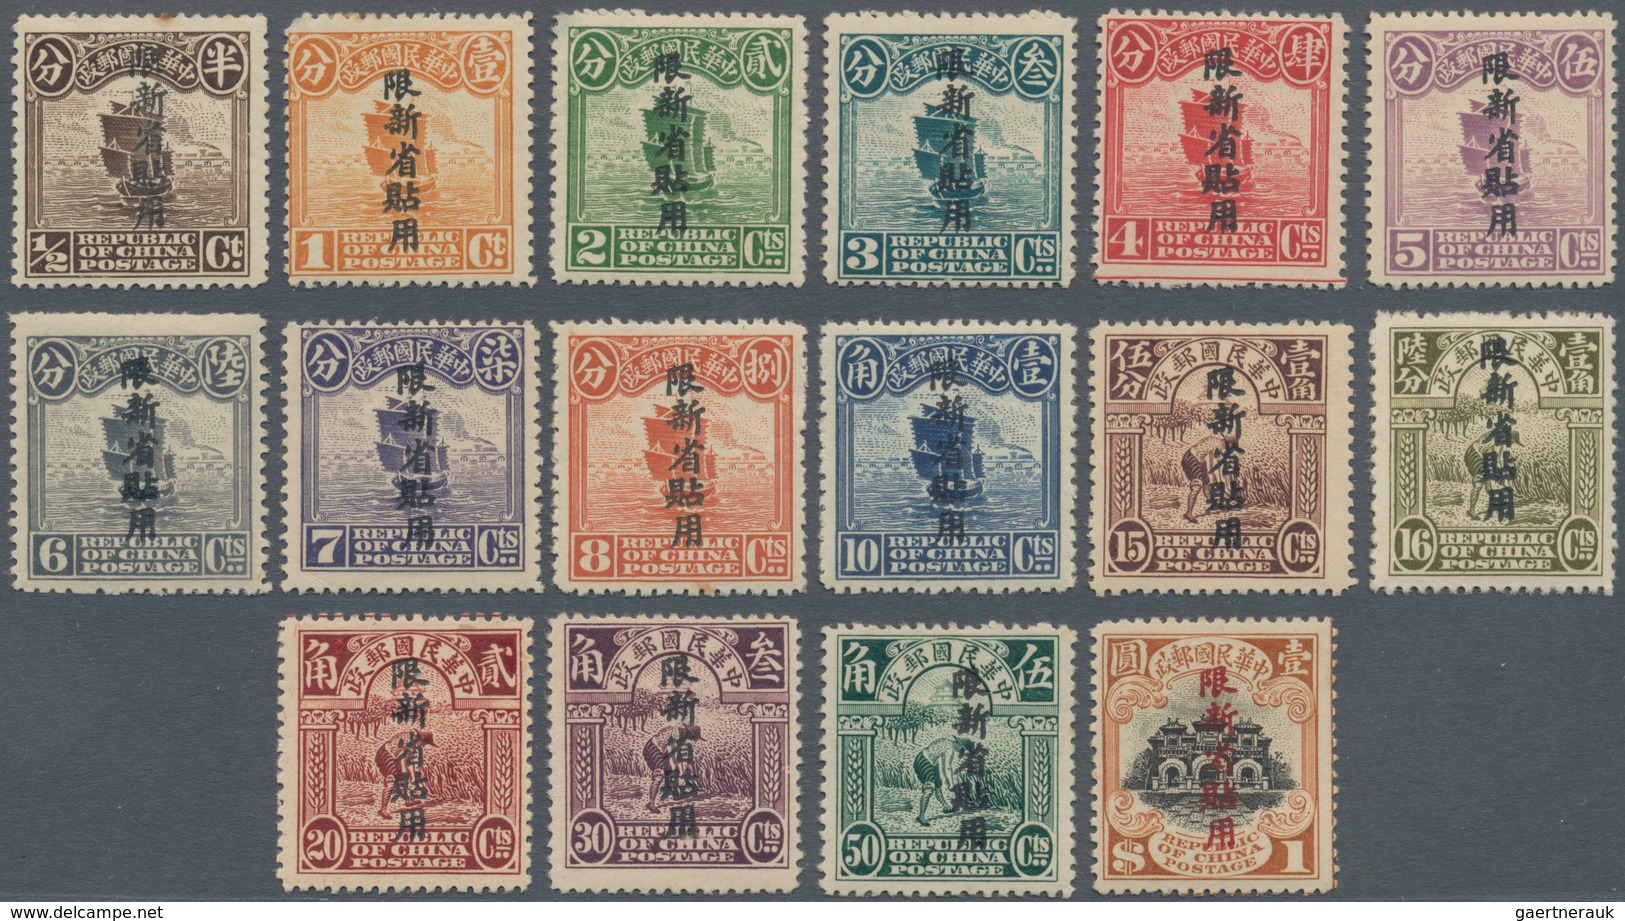 China - Provinzausgaben - Sinkiang (1915/45): 1915, Type I Surcharge, 1st Character Not In Alignment - Sinkiang 1915-49